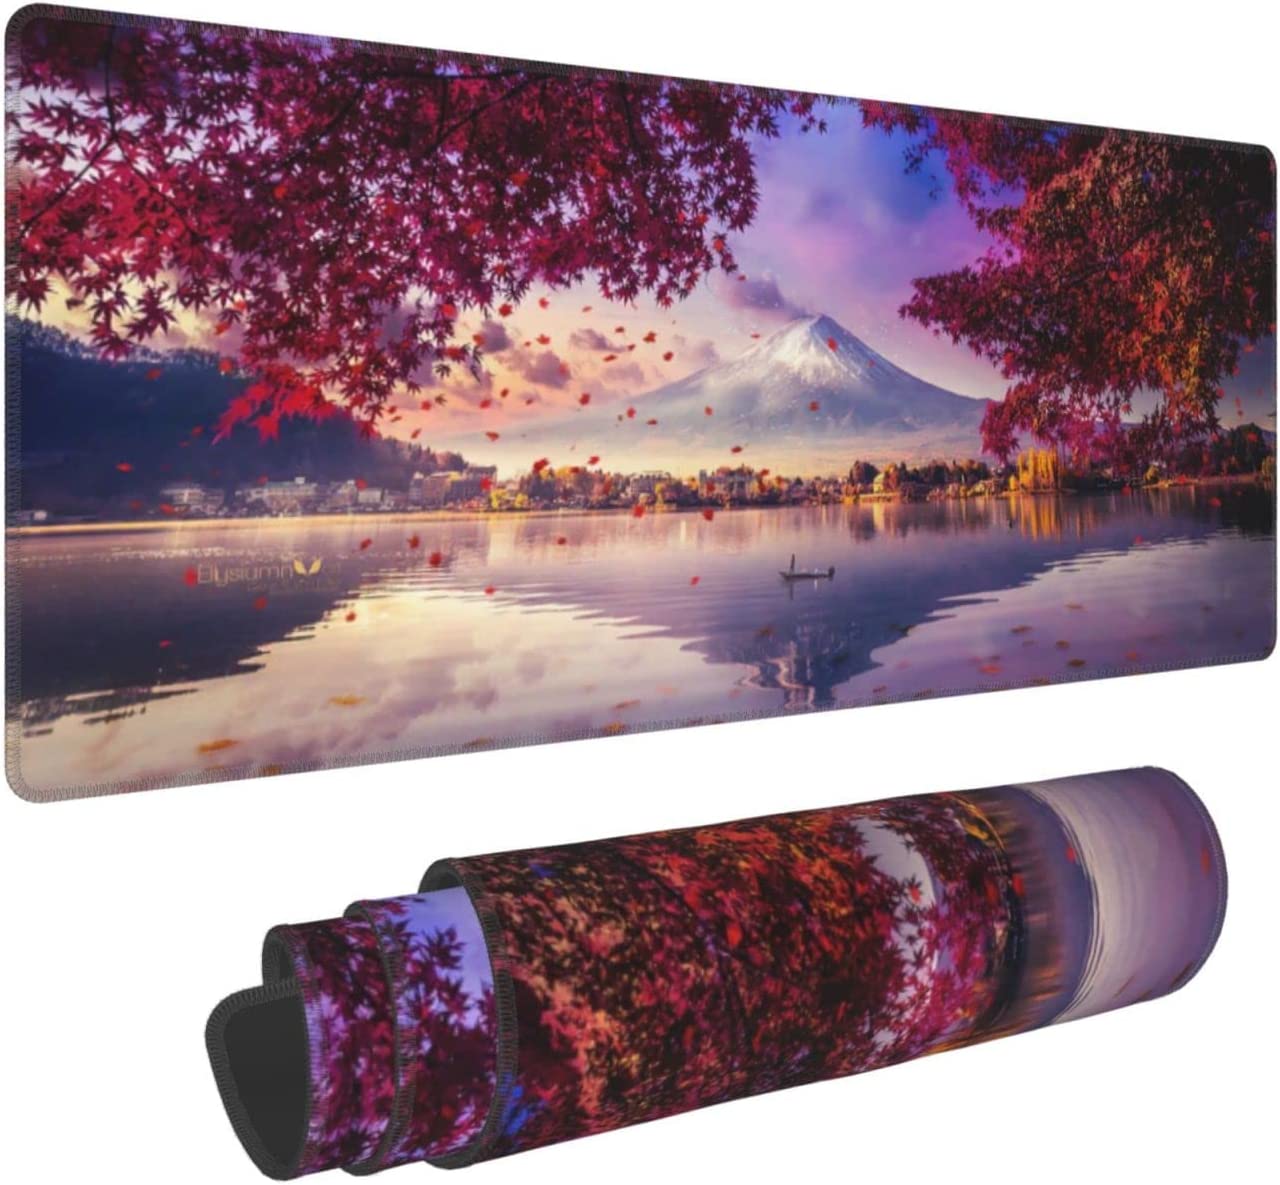 Japanese Cherry Blossom Ink Painting Fuji Mountain Scenery Game Mouse pad XL, Non Slip Rubber Base Mouse pad, Sewn Edge Table pad, Extended Large Mouse pad, 31.5 x 11.8 inches - image 1 of 6